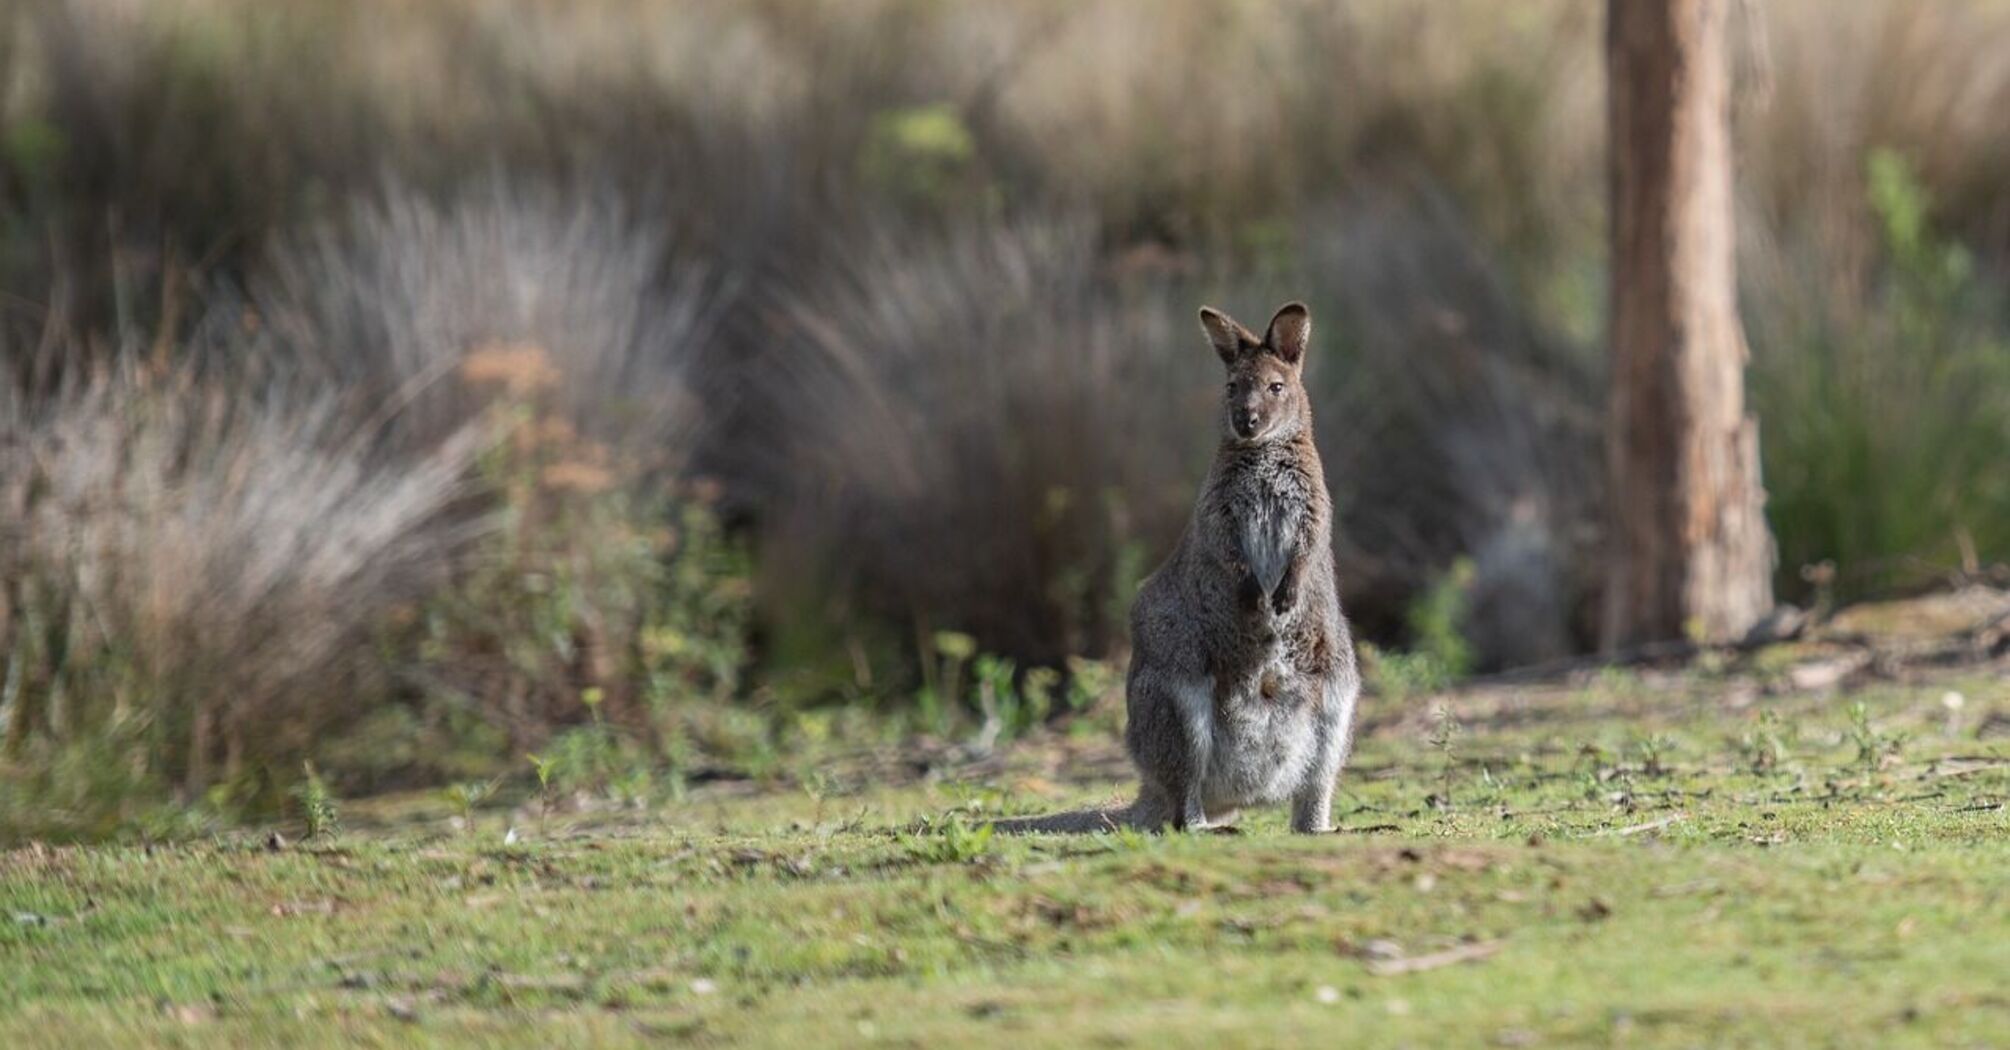 Worrying reports of Wallabies spotted in unusual places in New Zealand: why it's bad